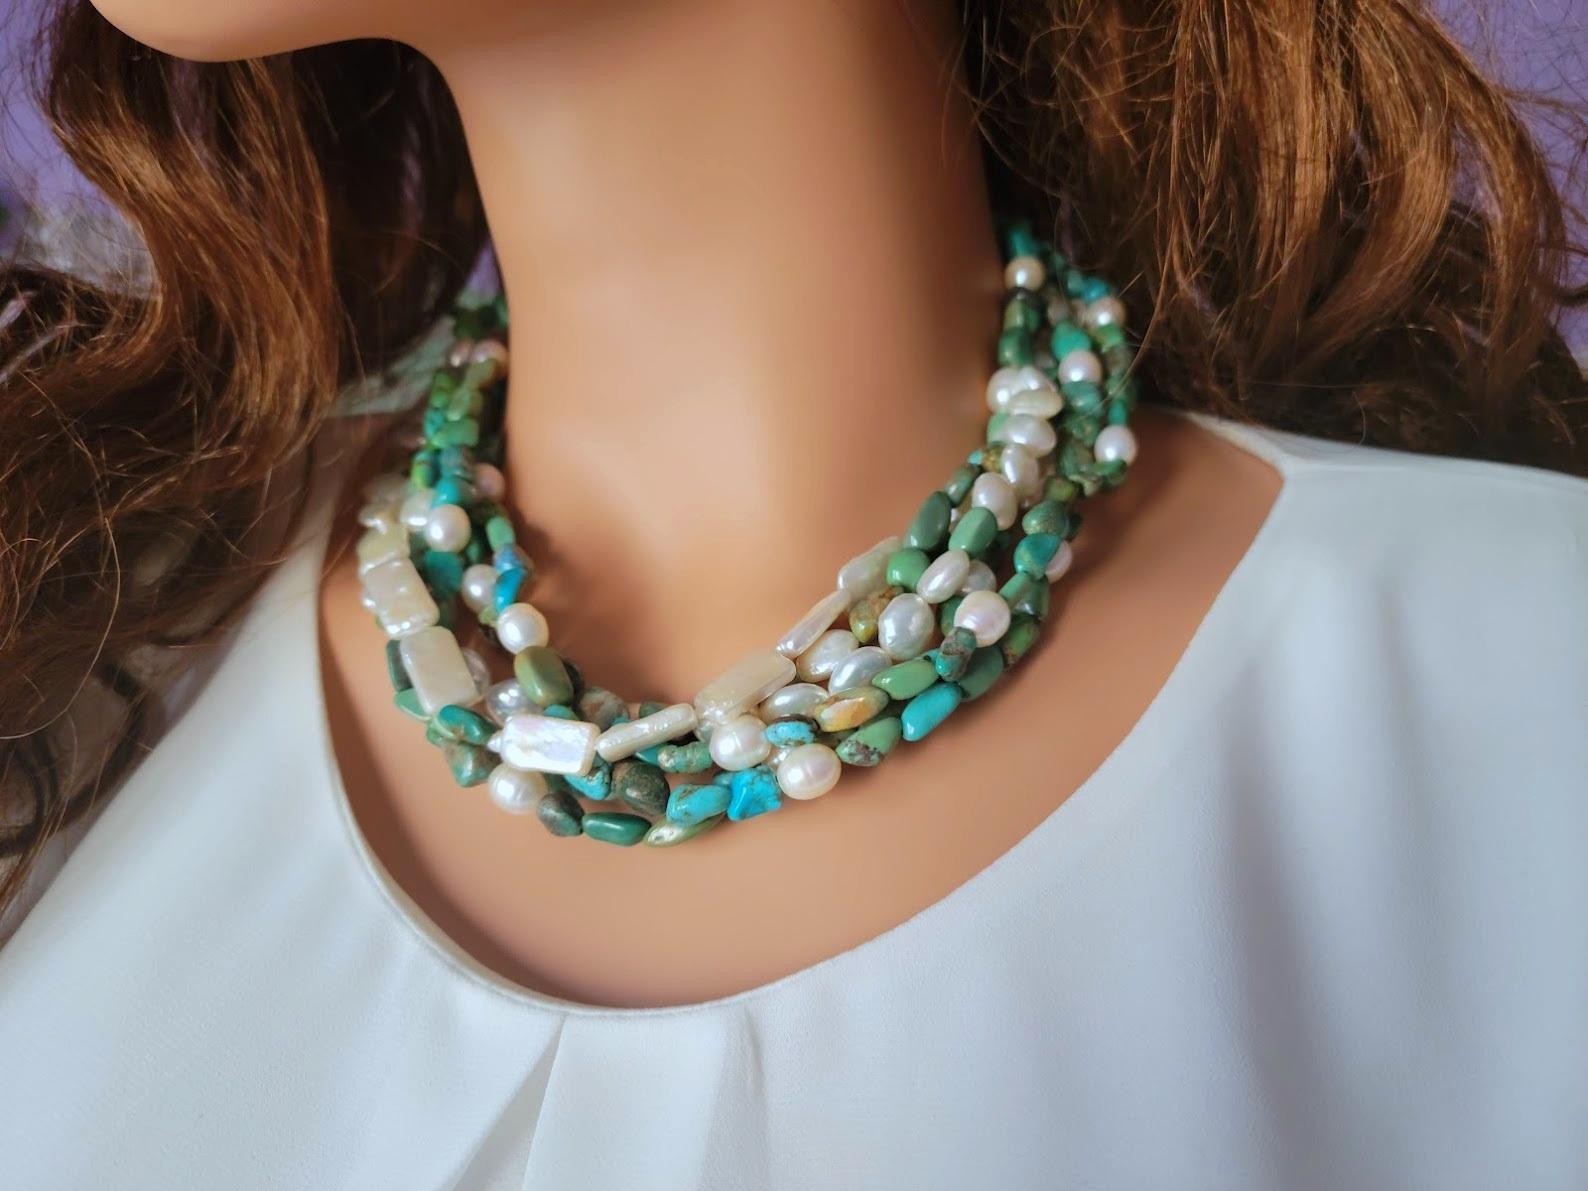 A 6-strand graduated beaded necklace of vintage natural turquoise and natural pearl. It's a very exceptional necklace.
The length of the necklace is 17.5 inches (44 cm) + a 3-inch extension chain with pearl bead.
The size of the turquoise irregular